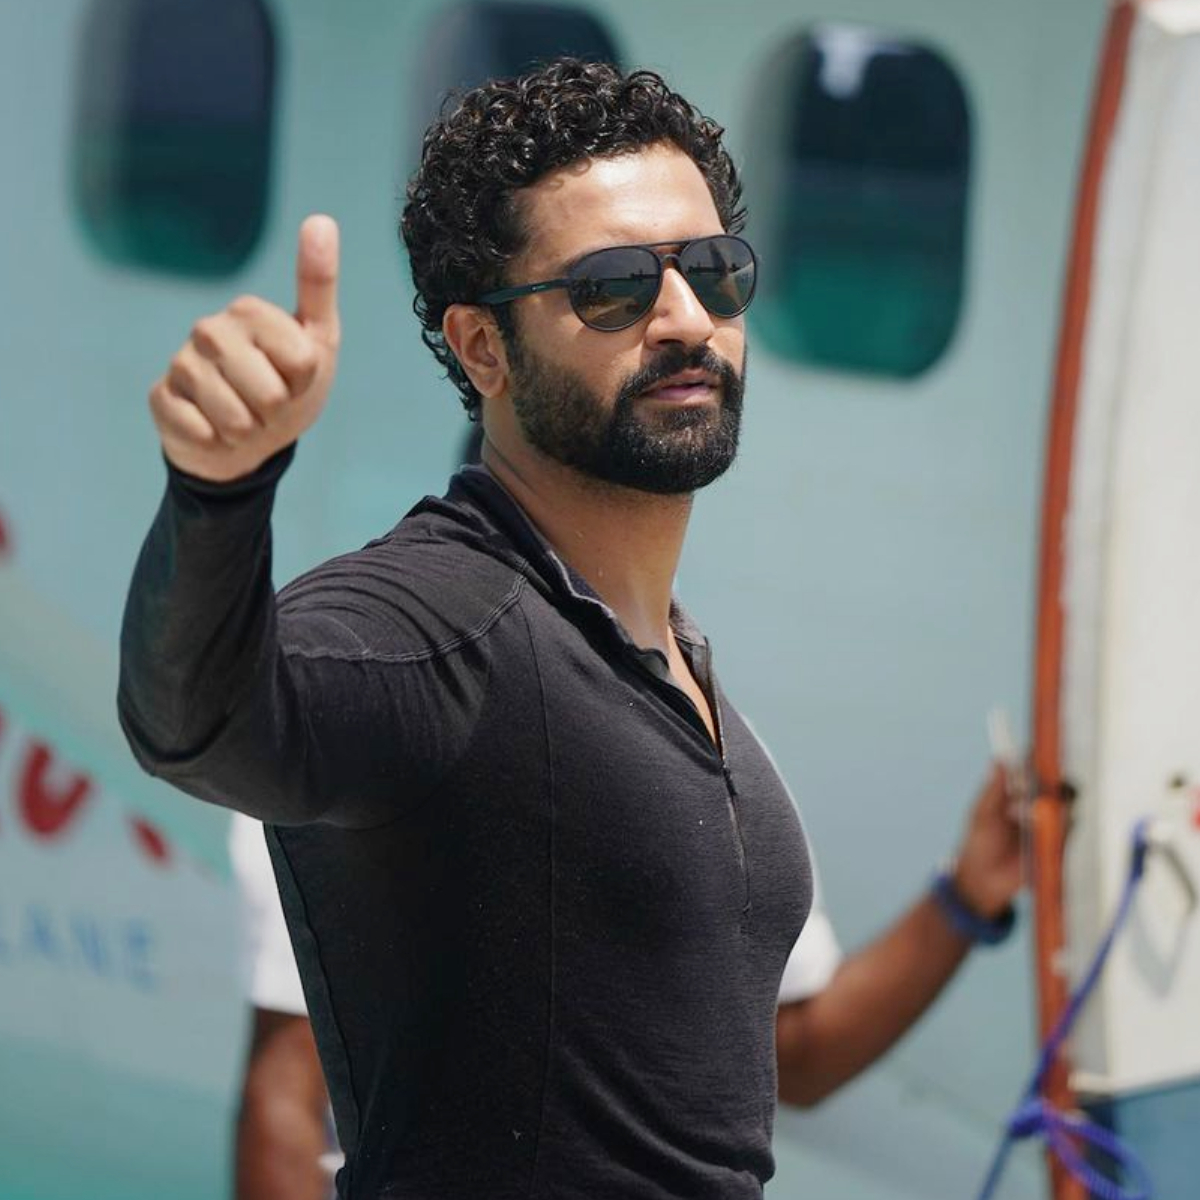 Into The Wild with Bear Grylls & Vicky Kaushal Review: URI star's sea adventure is packed with Josh so high